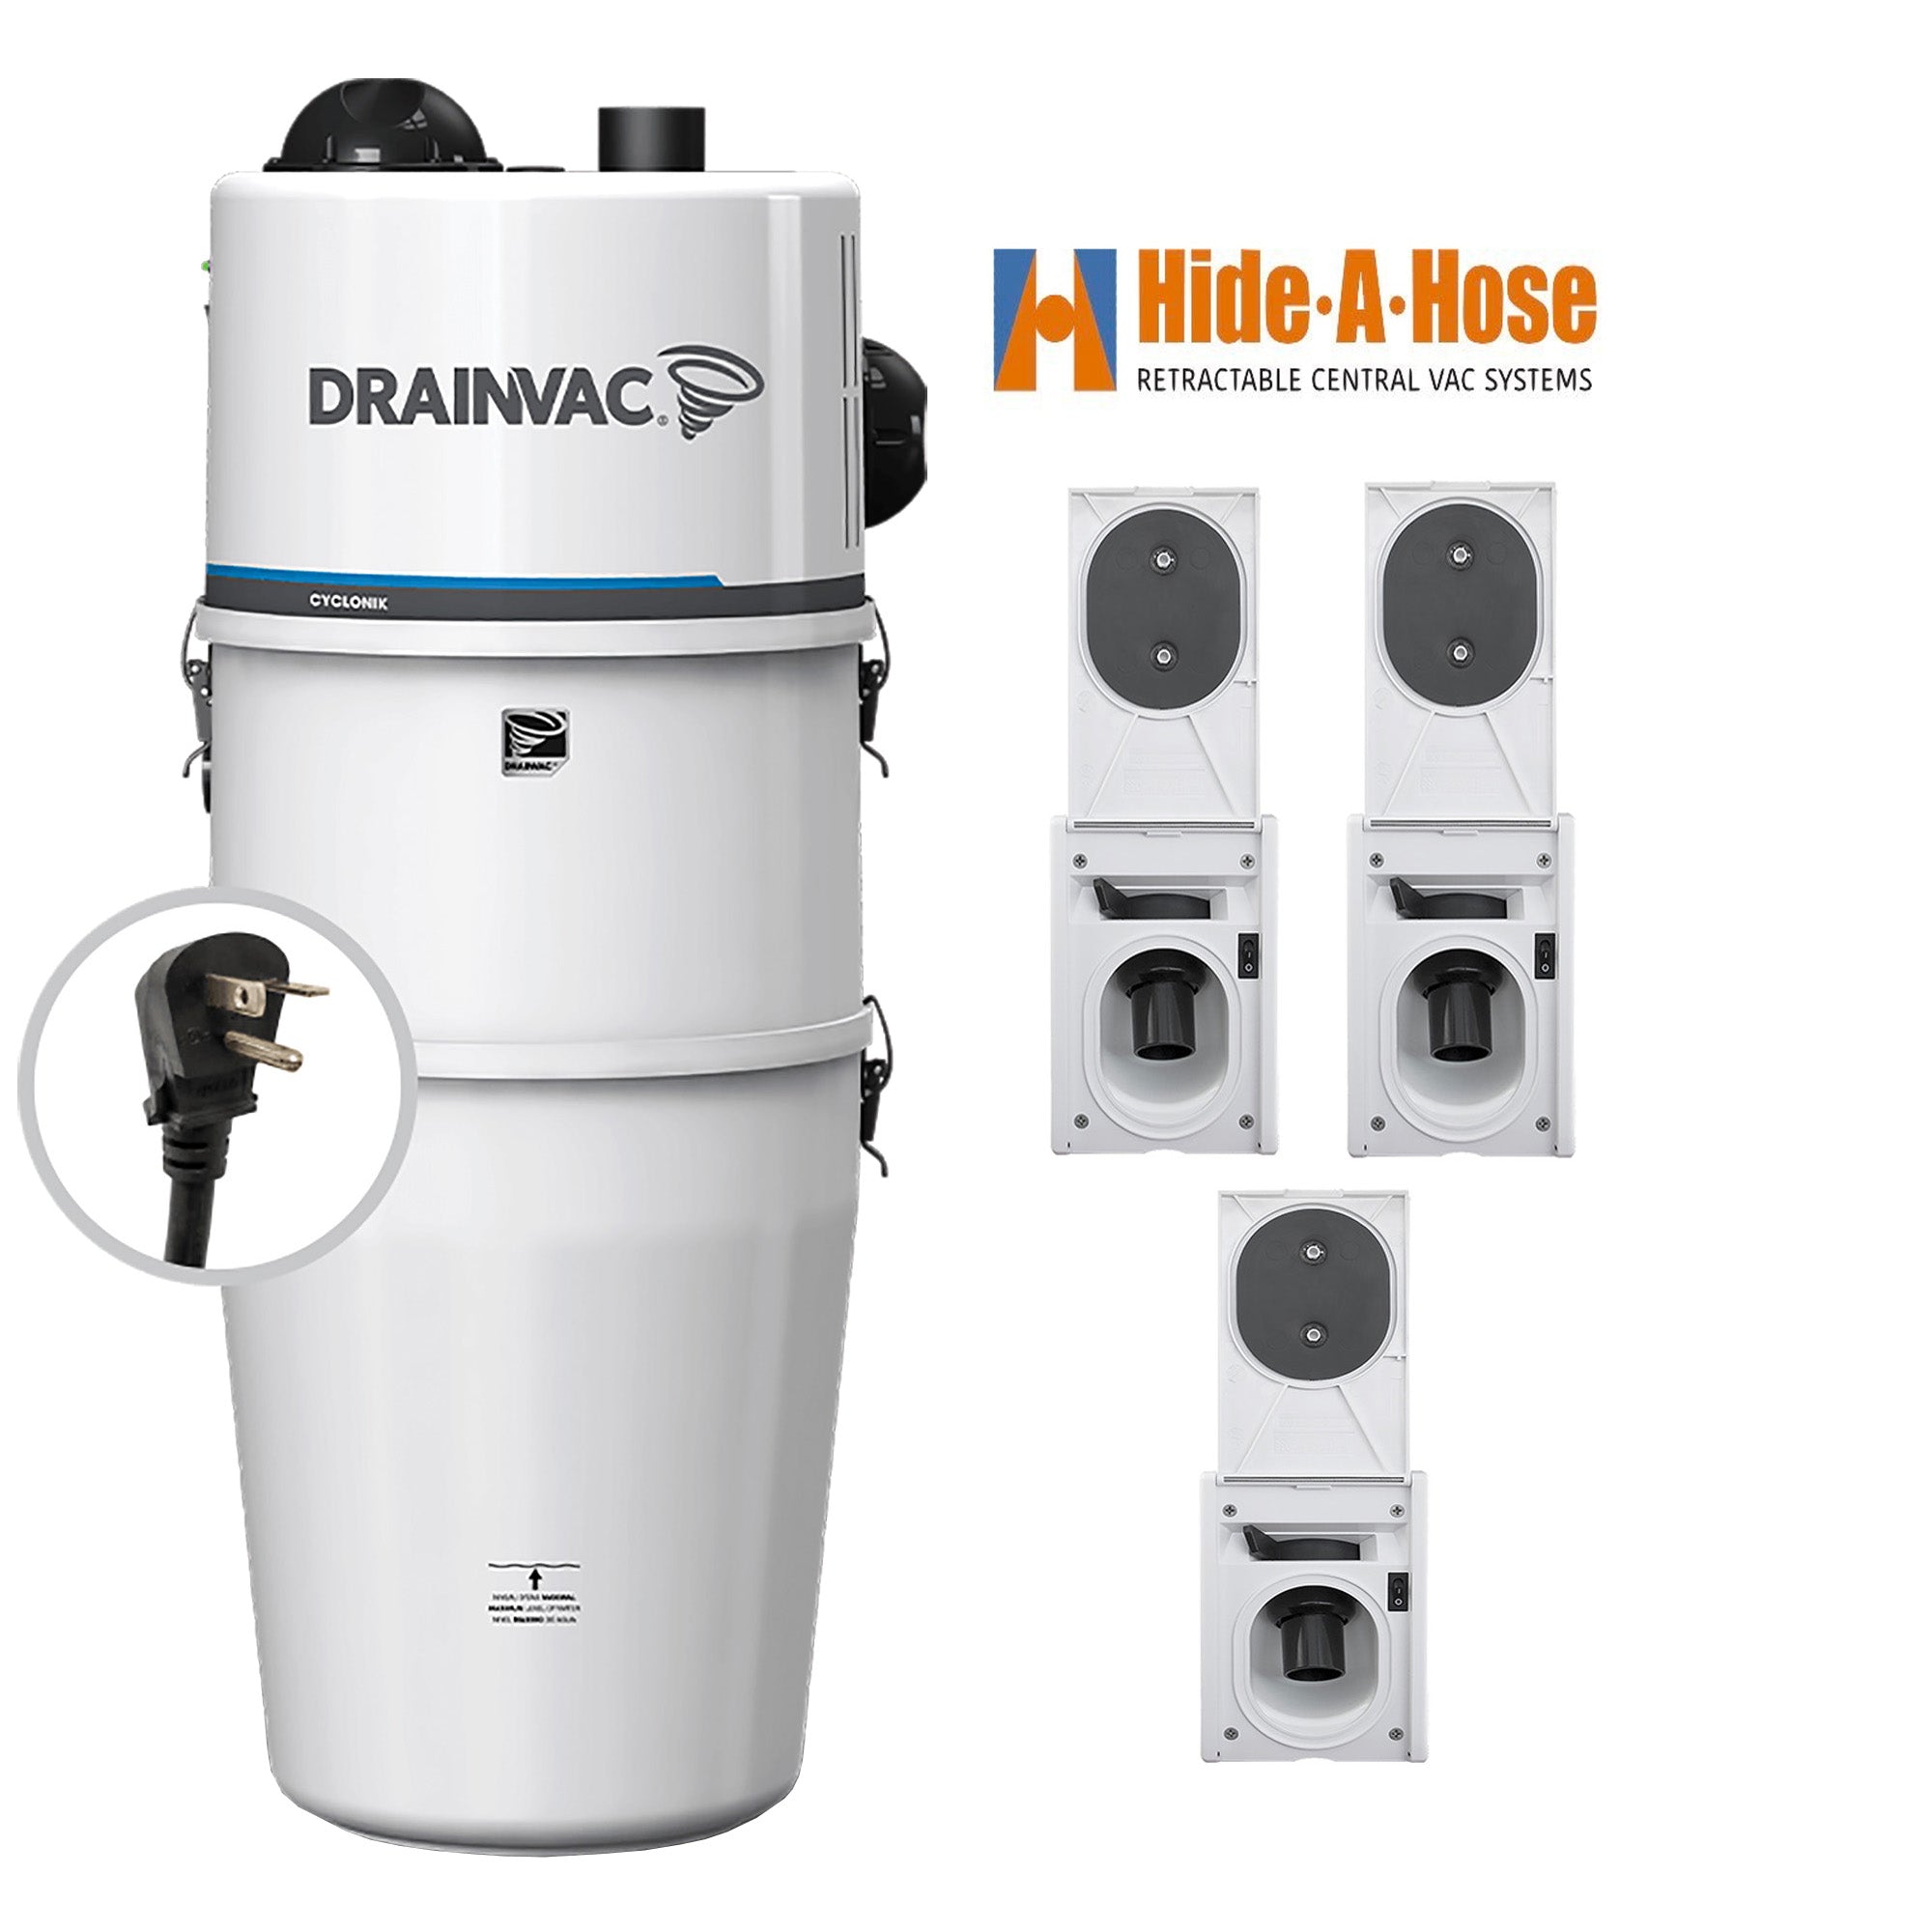 DrainVac DV1R15-CT Central Vacuum with Hide-A-Hose Complete Installation Package (3 Valves)